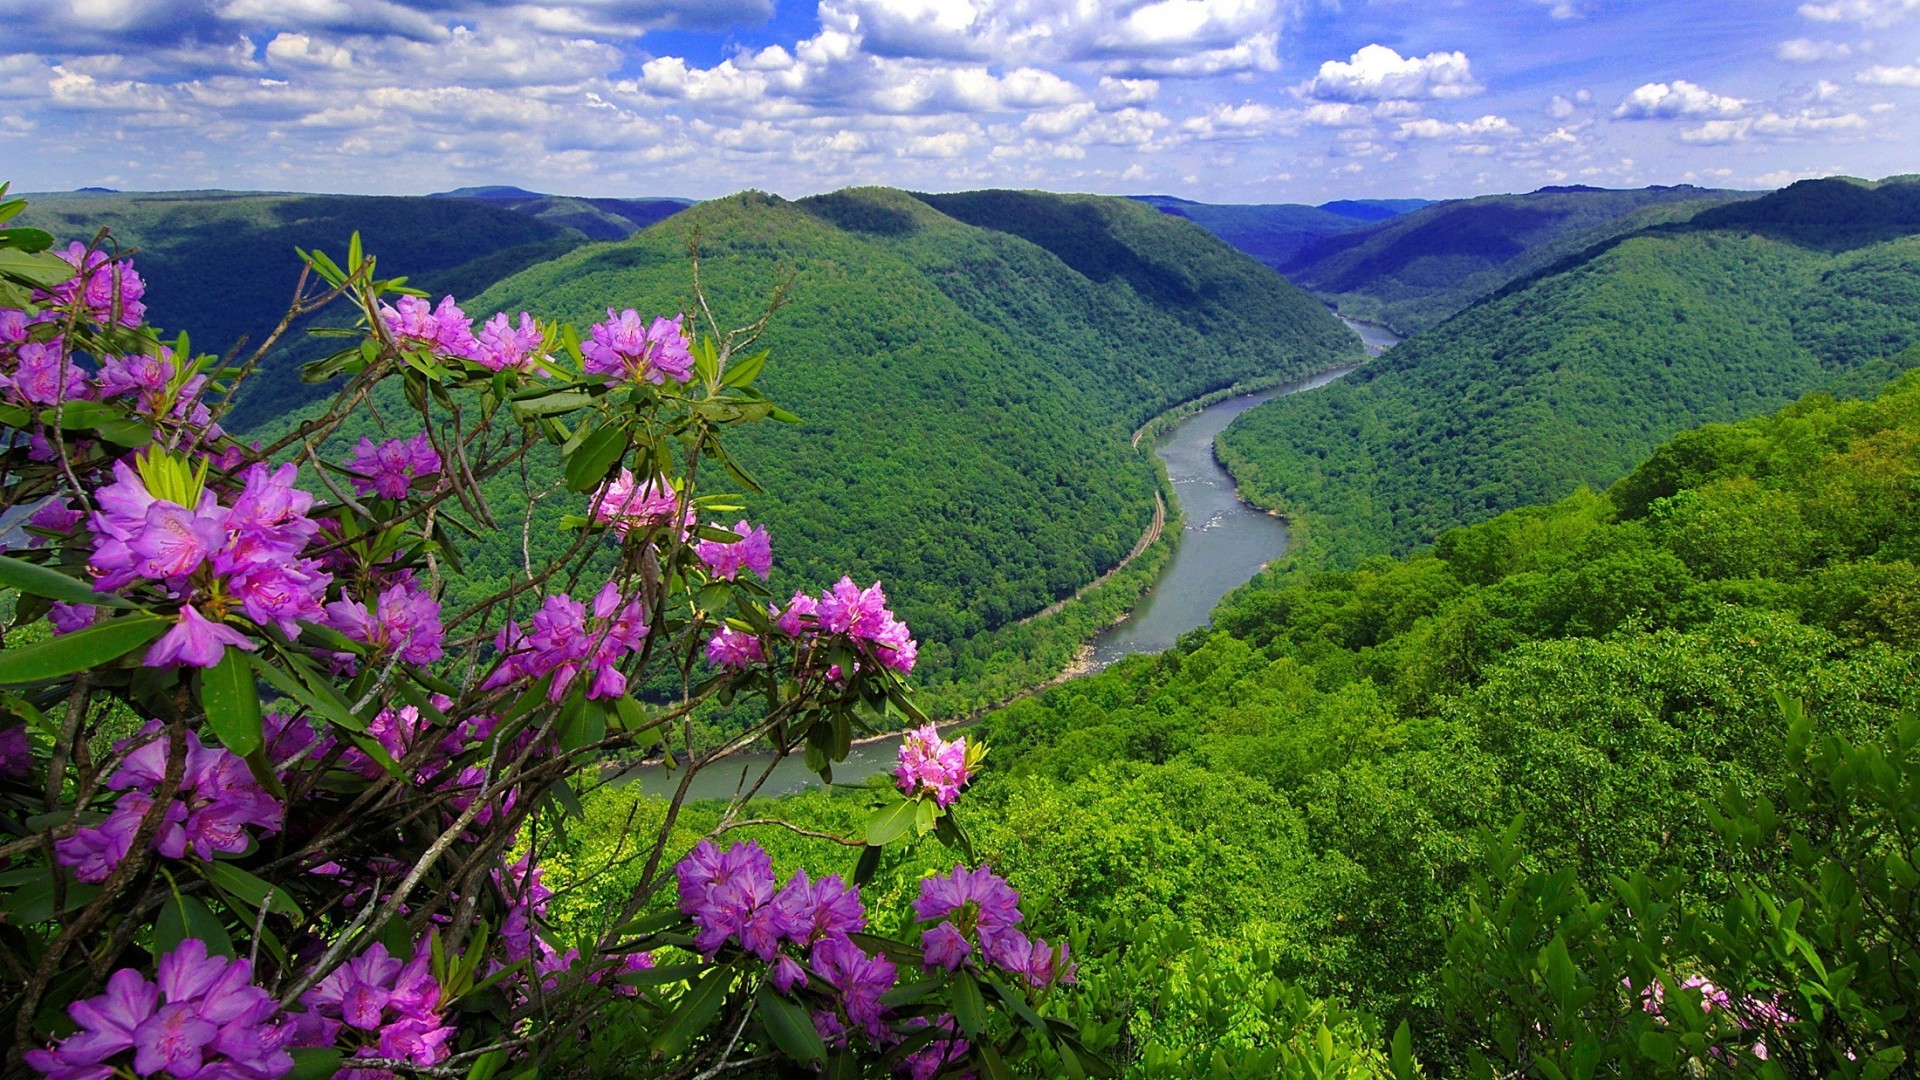 Wallpaper Picturesque Kanawha River In The Hills Of West Virginia Usa